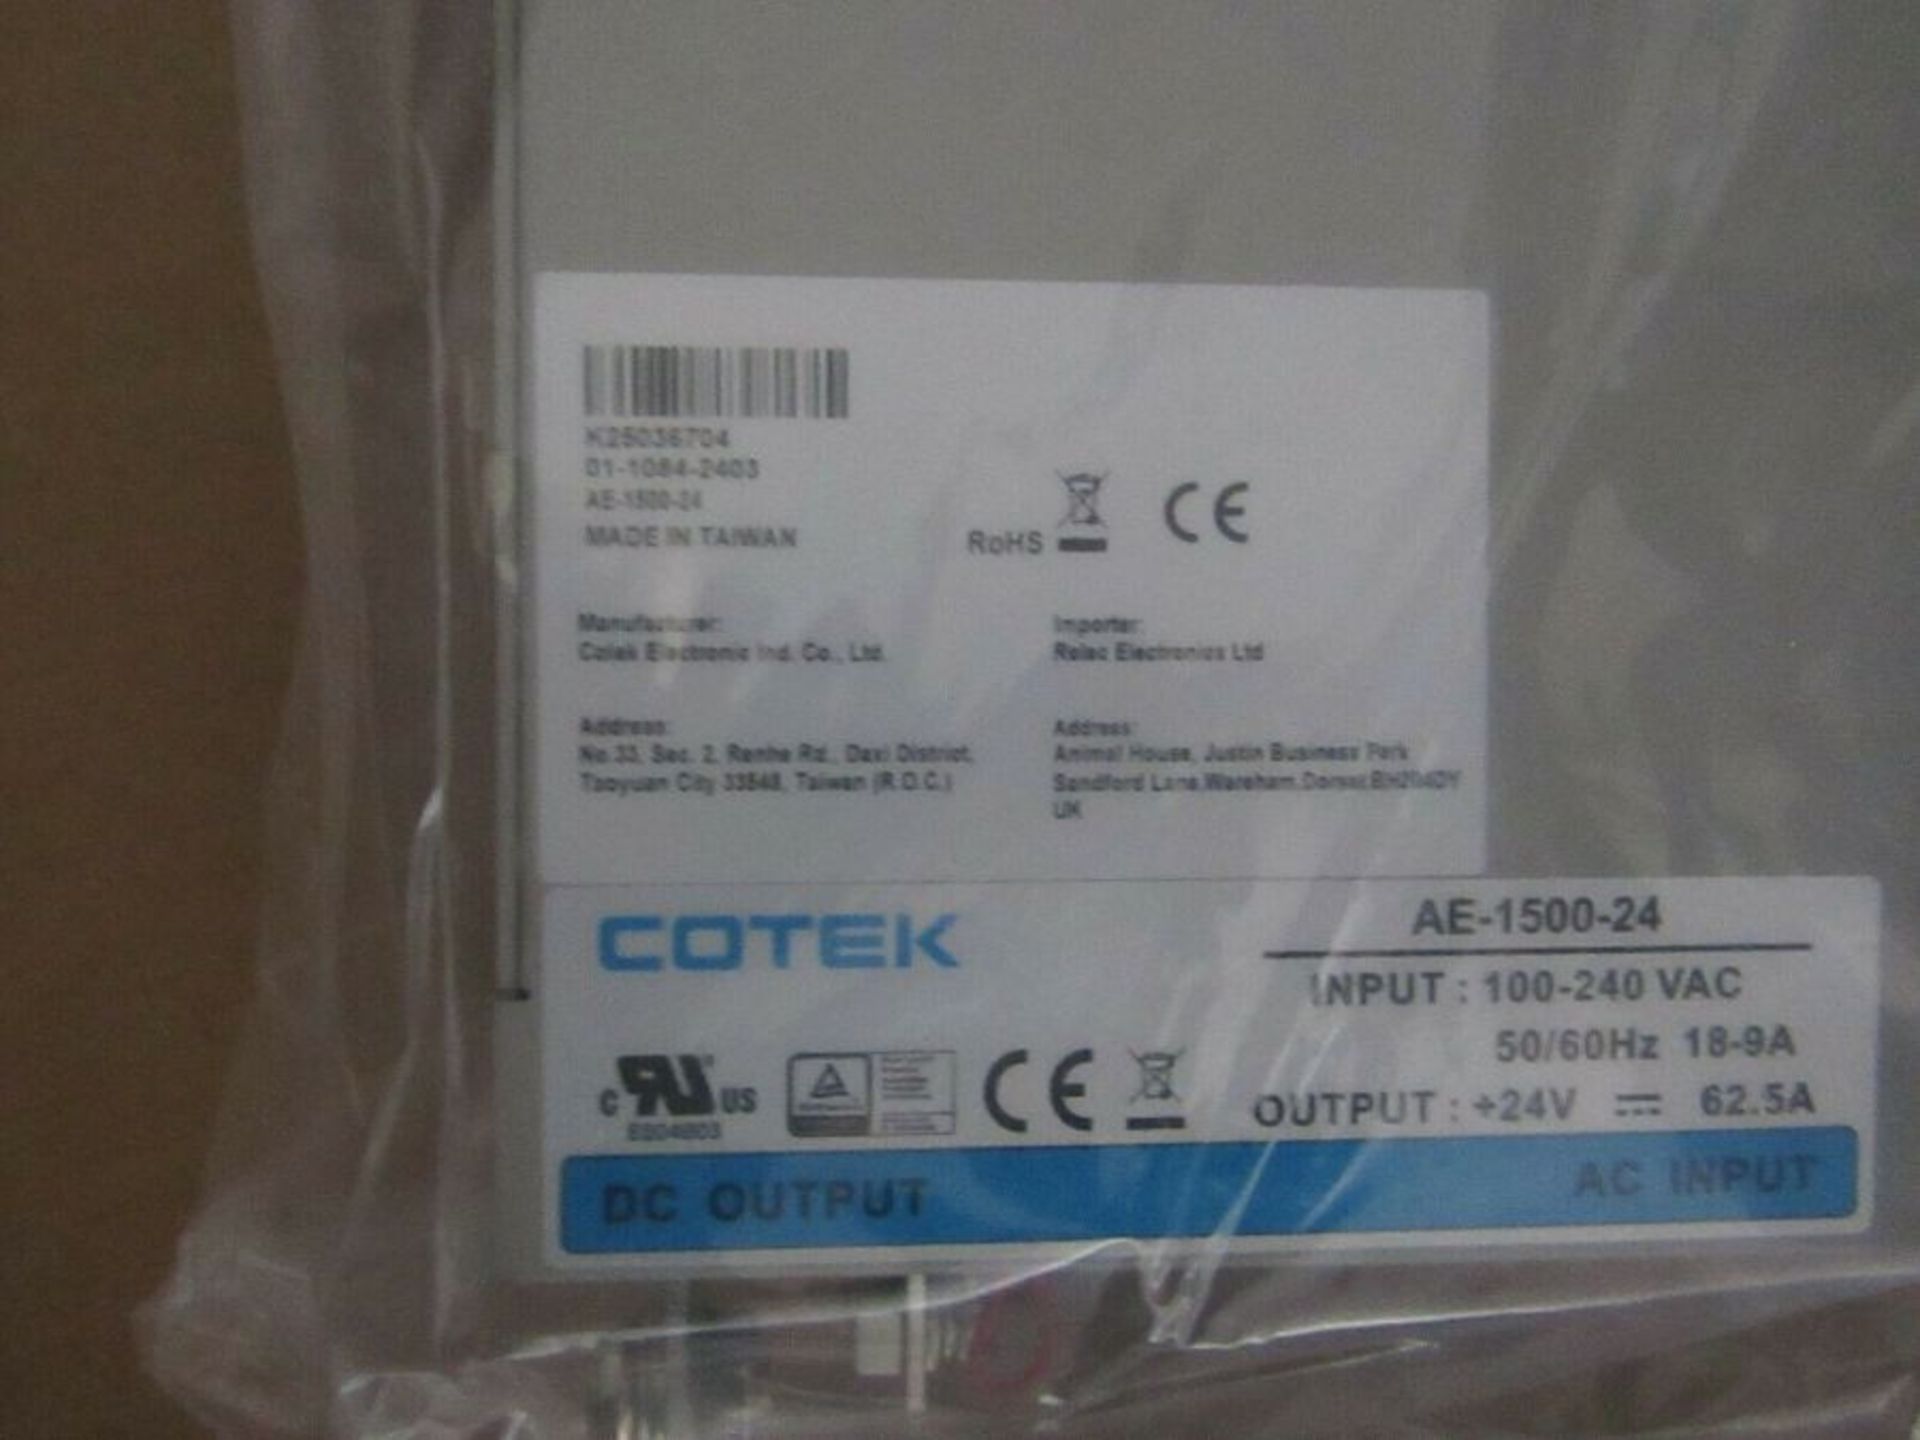 10 x COTEK, 1.5kW Embedded Switch Mode Power Supply SMPS, 24V dc, Enclosed - AE-1500-24 - £5k at RS - Image 2 of 3